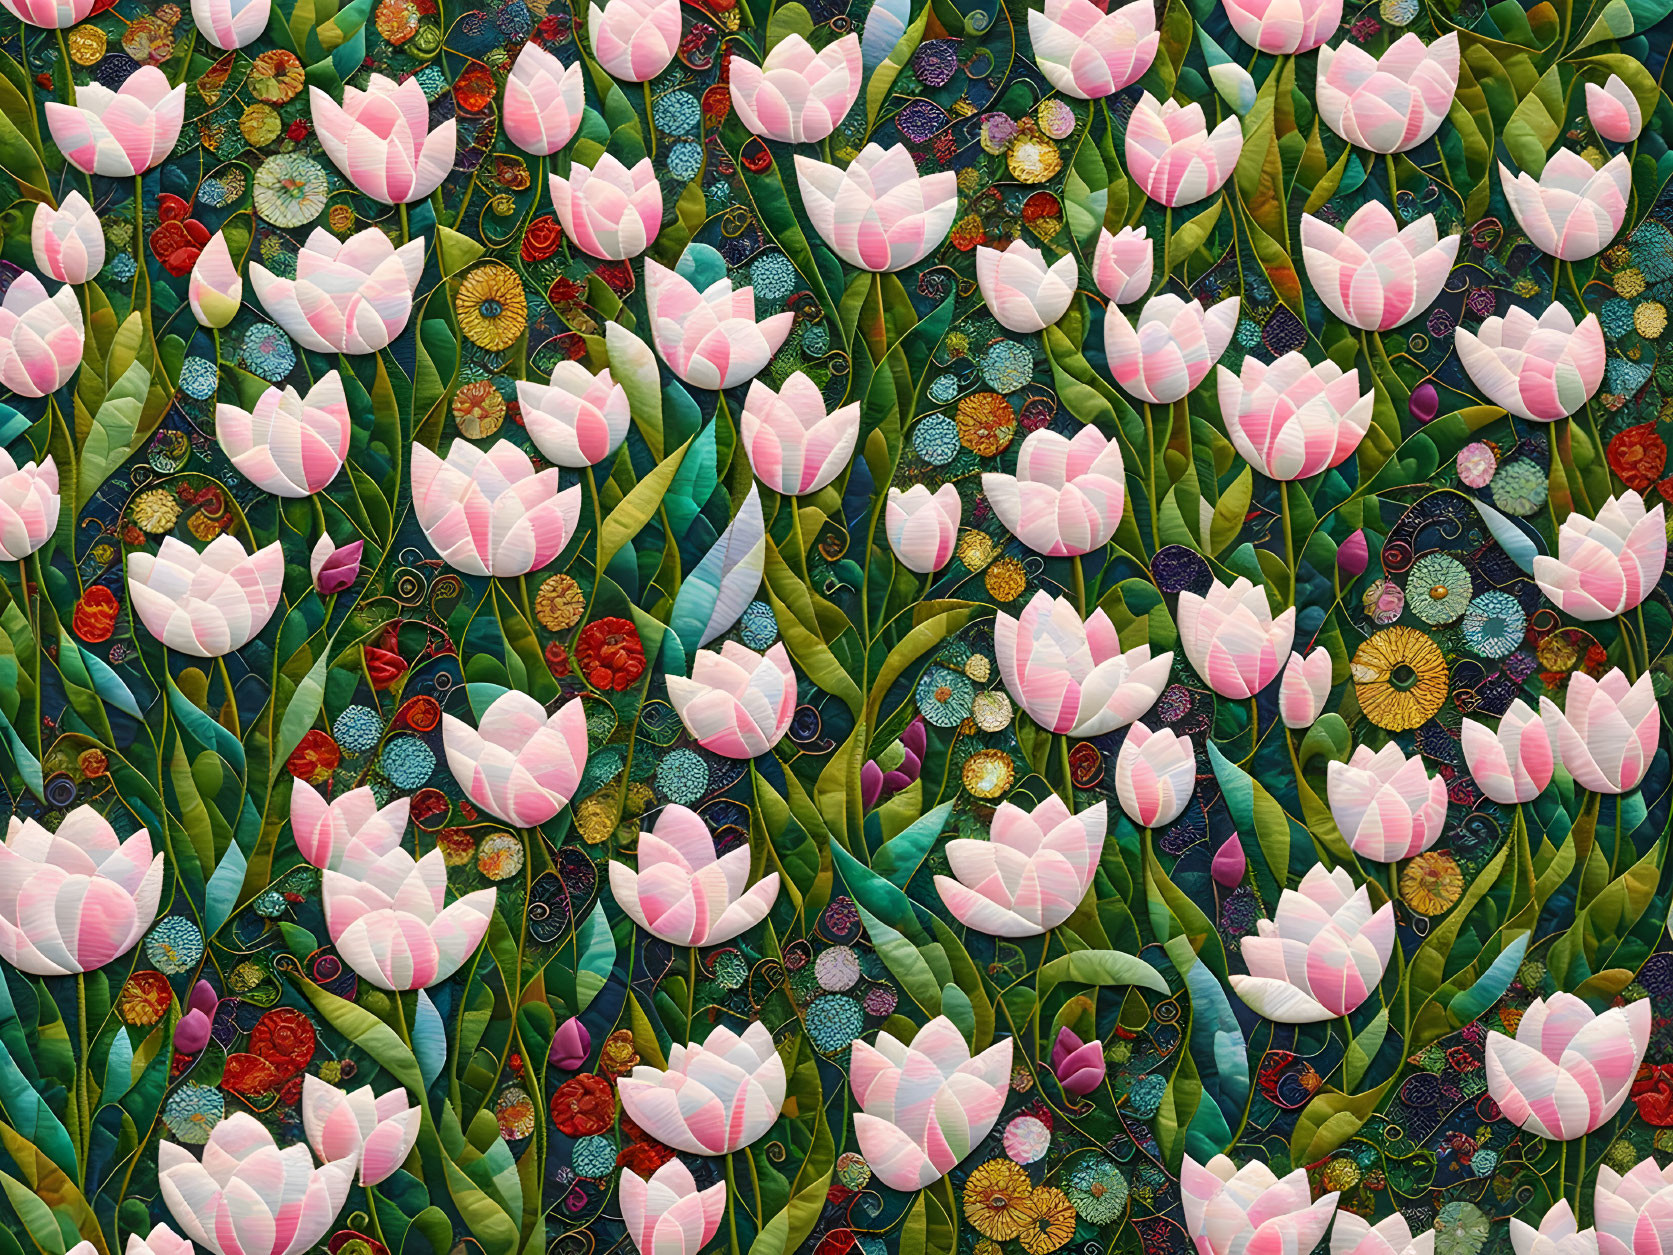 Detailed Pink and White Tulip Pattern with Circular Motifs